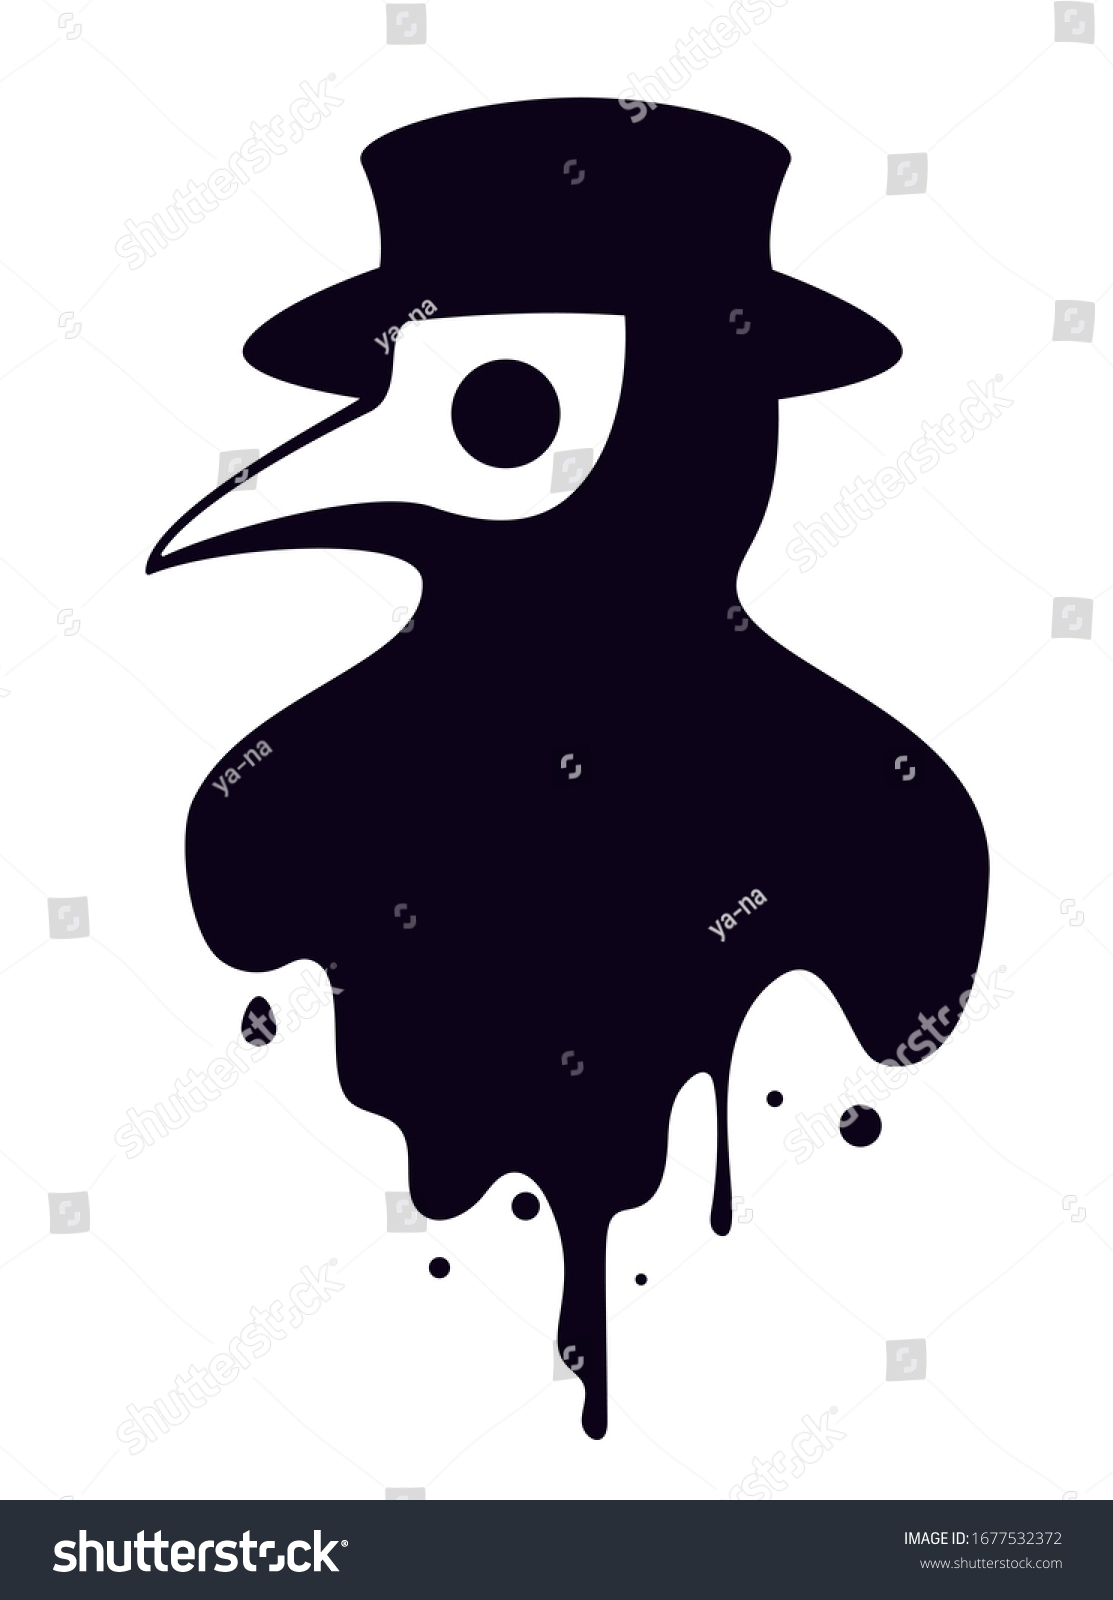 SVG of Plague doctor head profile with a bird mask and a hat, vector illustration in black and white colours. svg